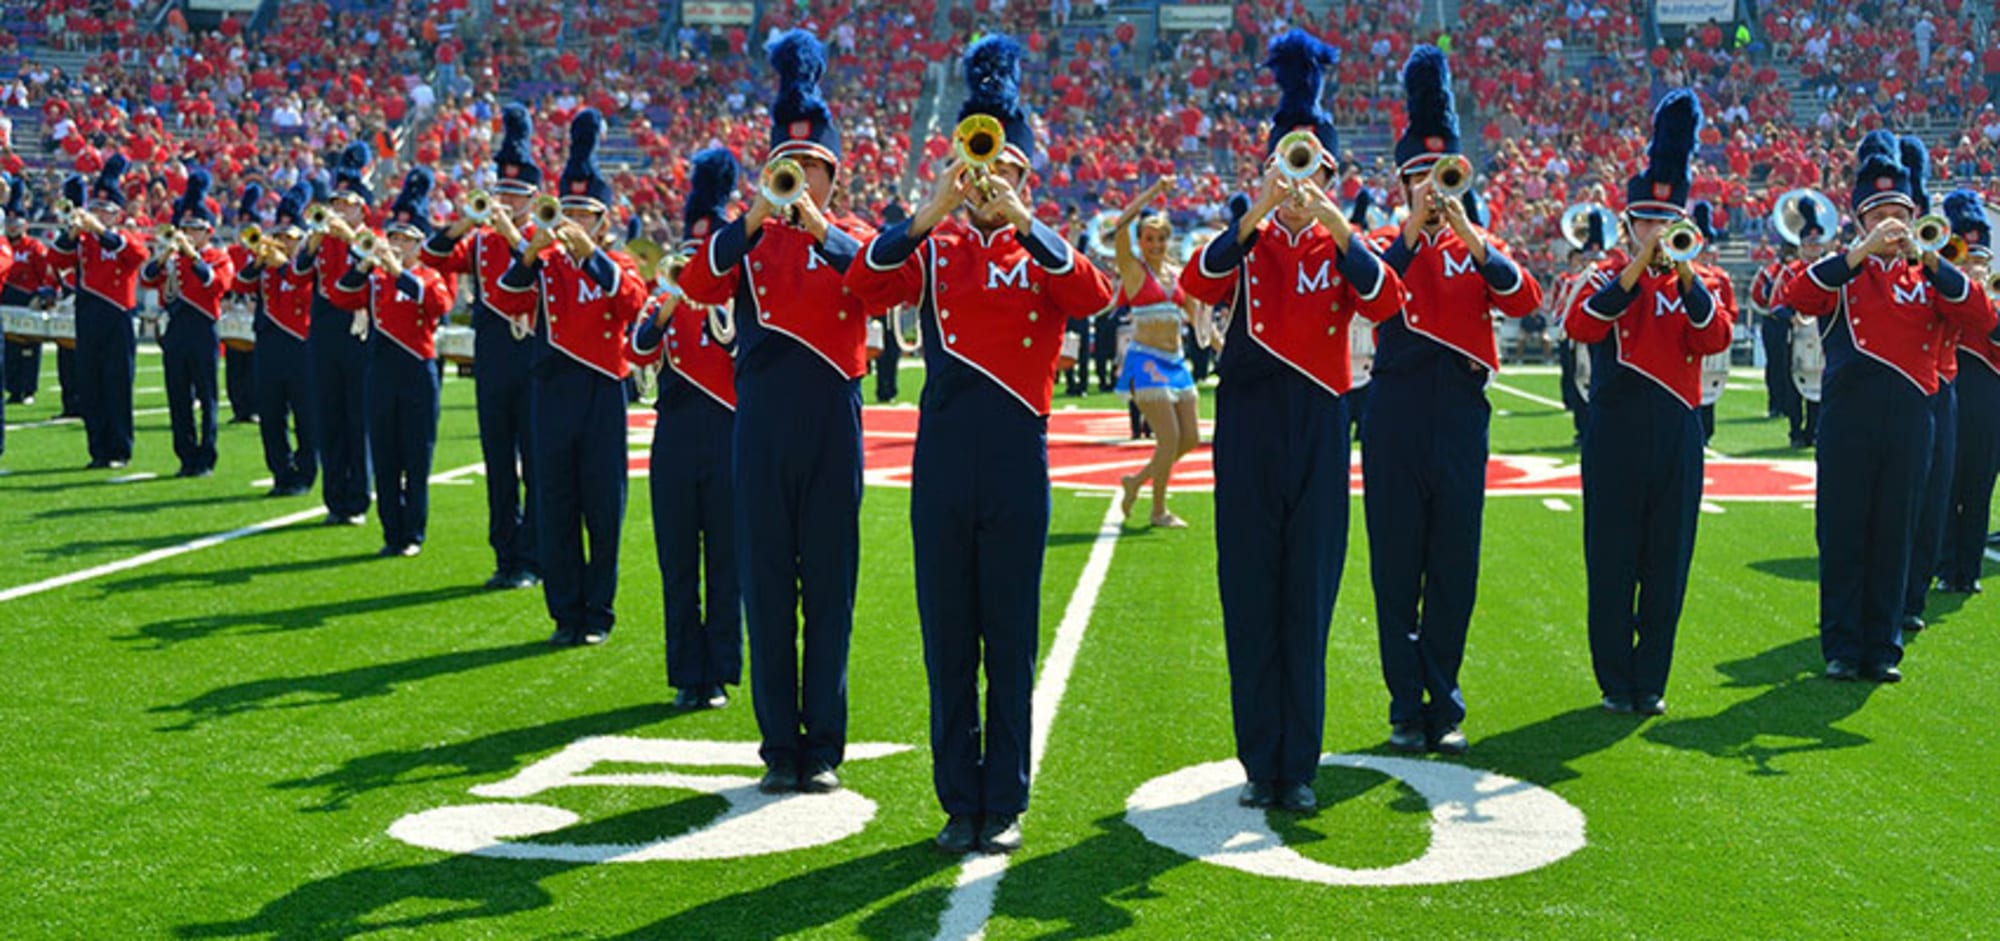 The Ole Miss Band Proving To Be One Of The Best In The Country